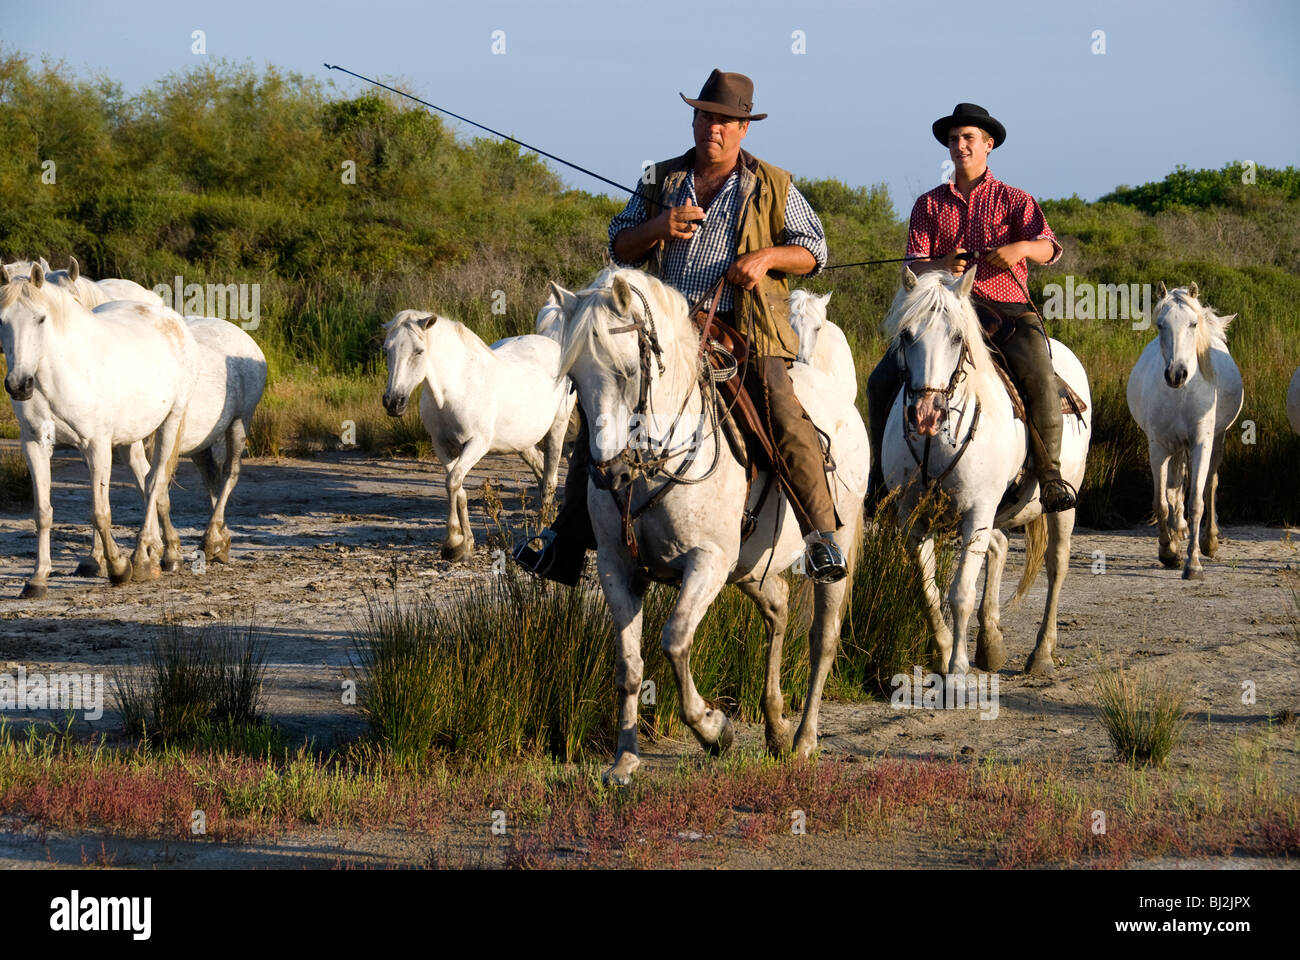 Gardians on their horses, the White Horses of the Camargue, Provence, France Stock Photo